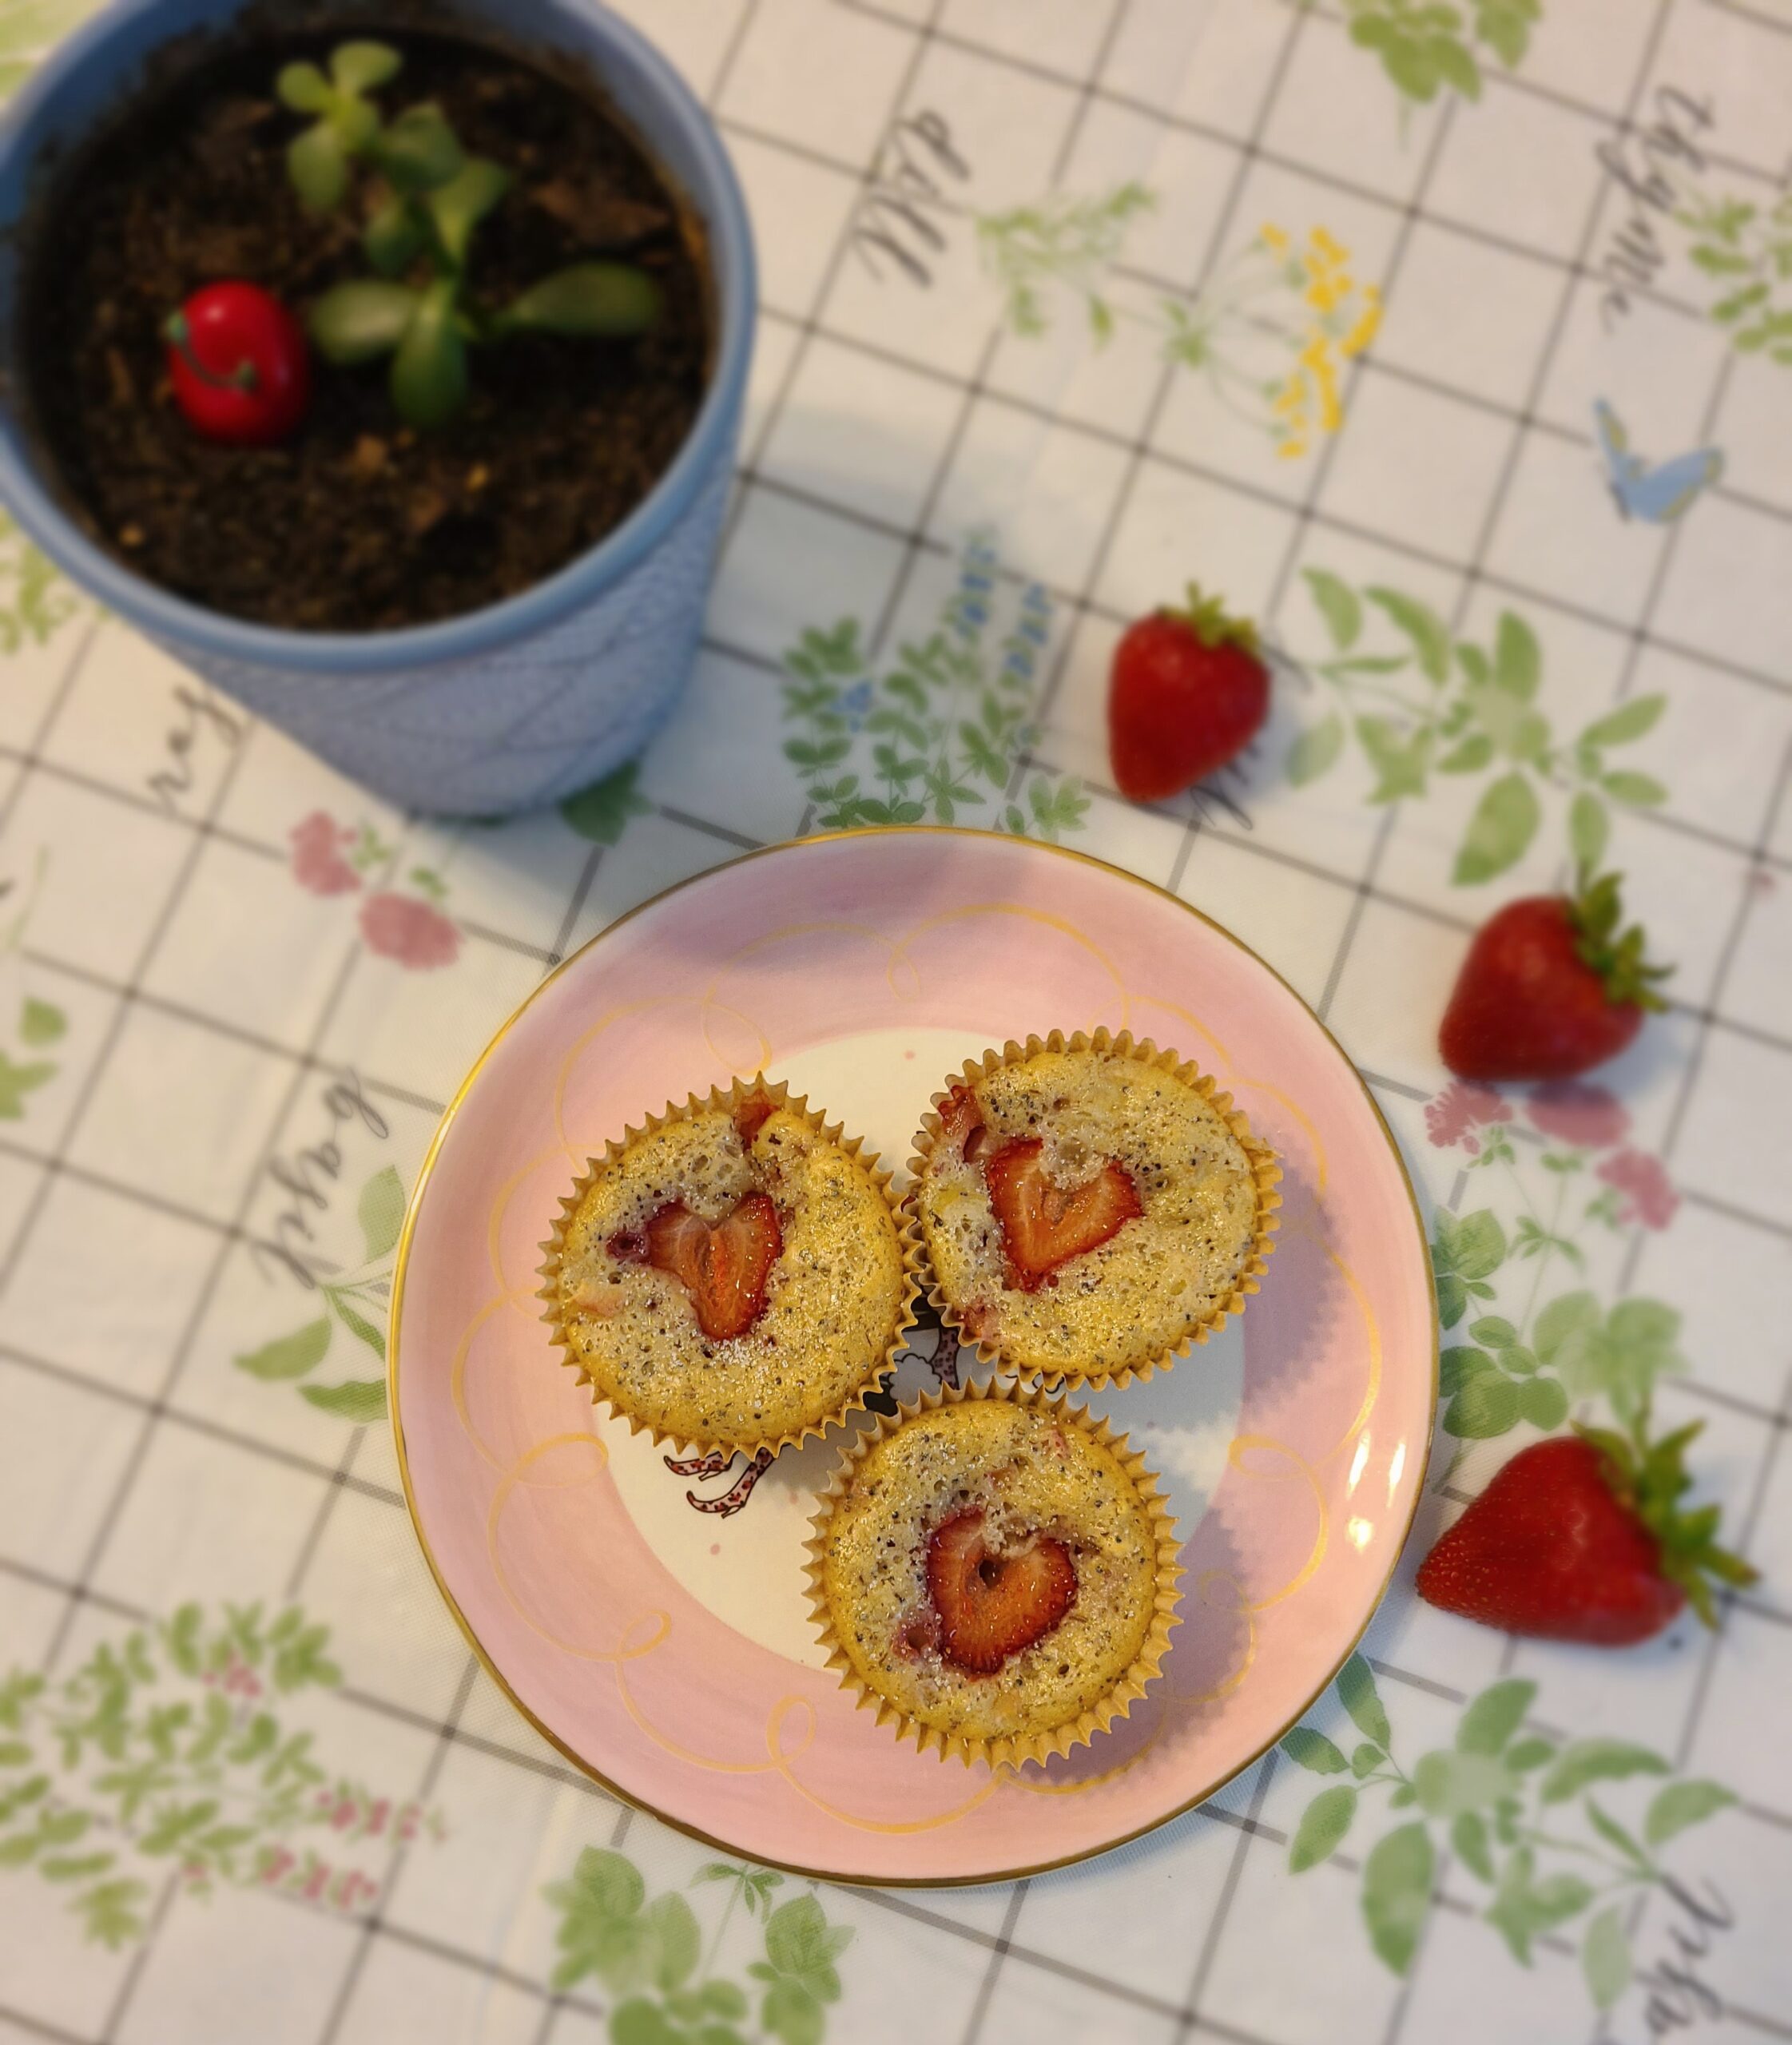 three vegan strawberry rhubarb muffins on a pink plate next to strawberries and a small plant